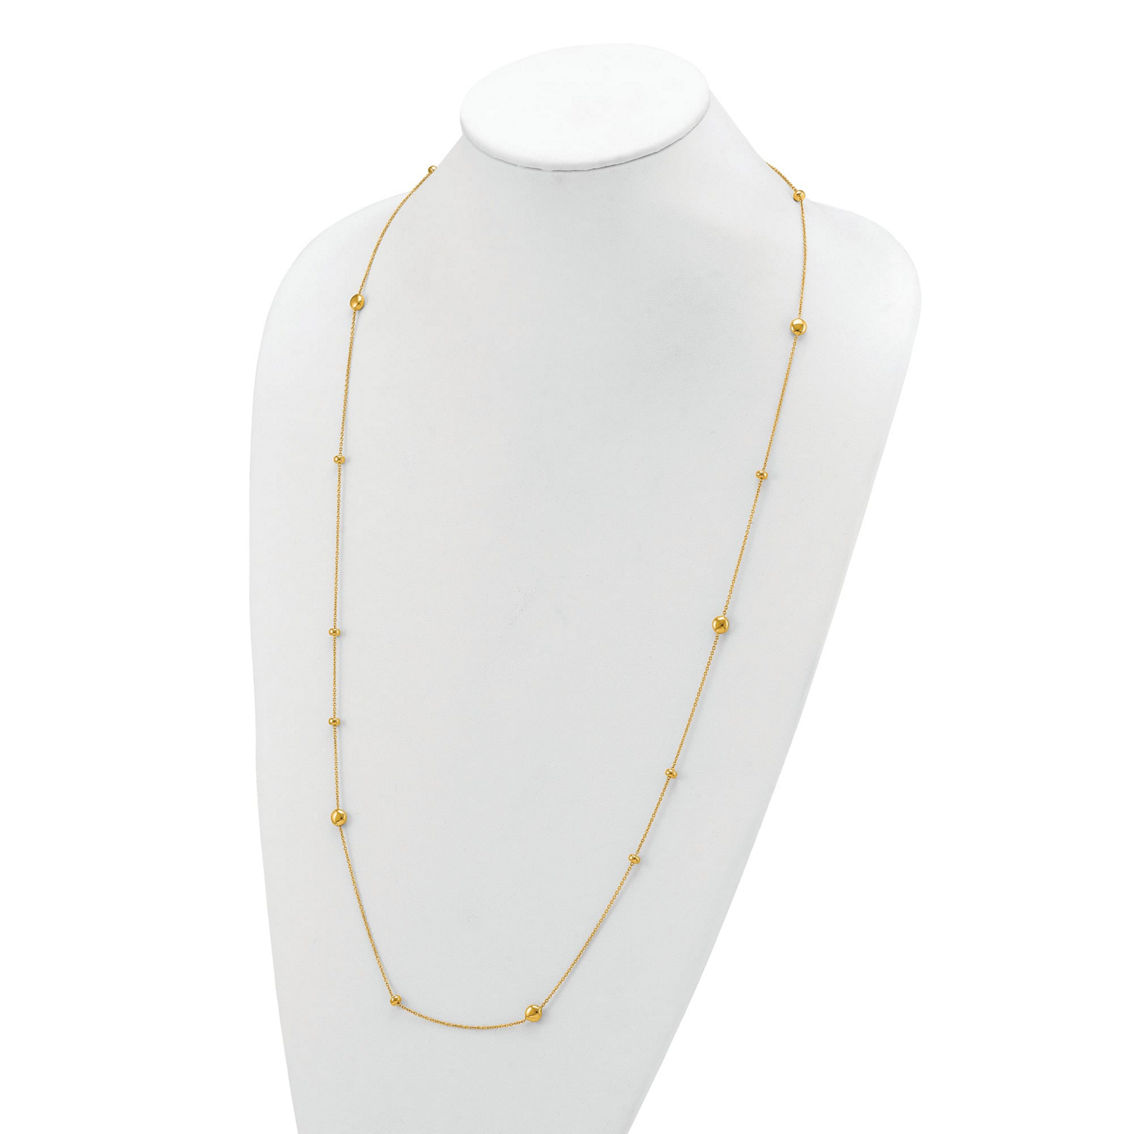 18K Gold Italian Elegance Chain Necklace - Image 4 of 5